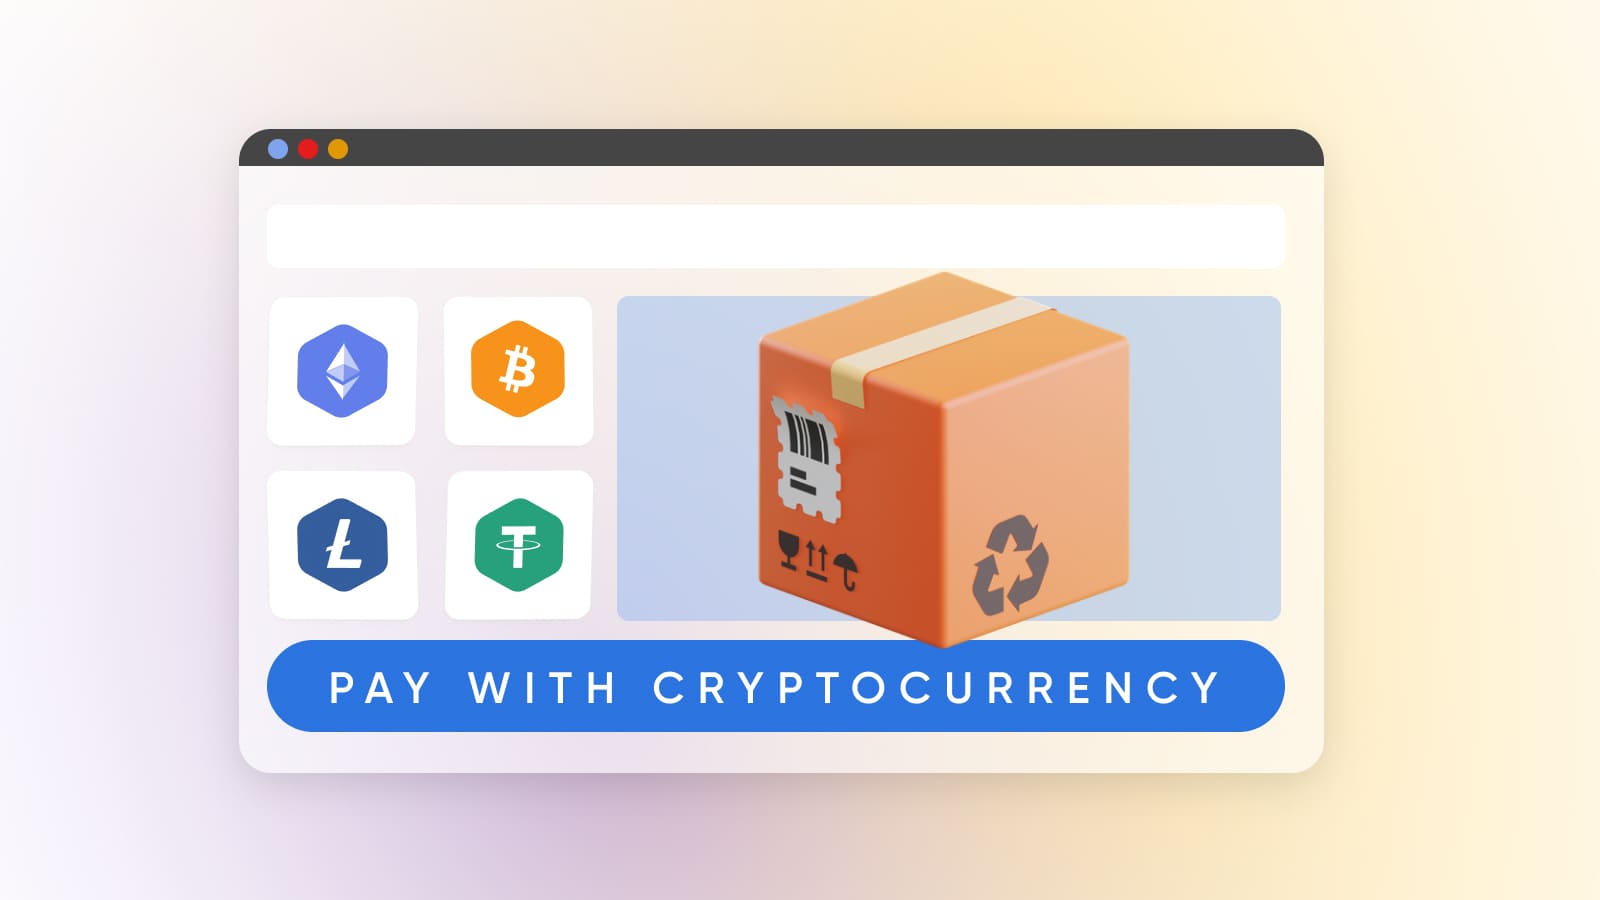 Cryptocurrency payments when shopping online benefit both the customer and the seller.